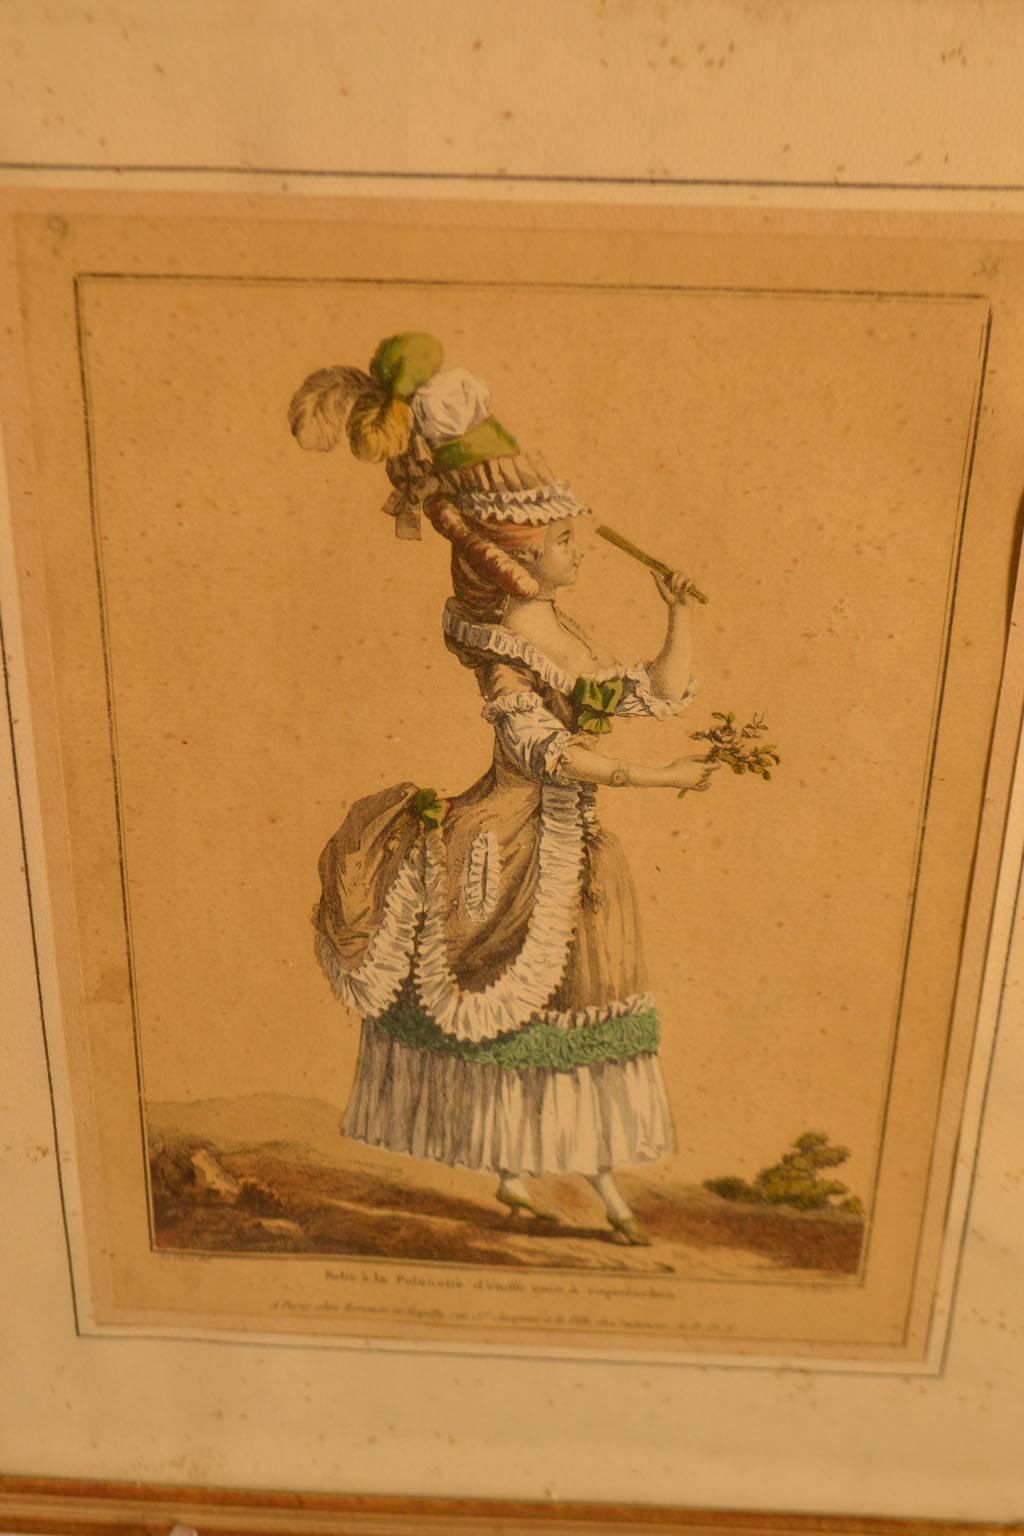 18th century framed fashion engraving of a woman dressed for entertaining or to be entertained, with a plume feather hat, a fancy bustle with green trim and a bouquet of flowers in her hand.